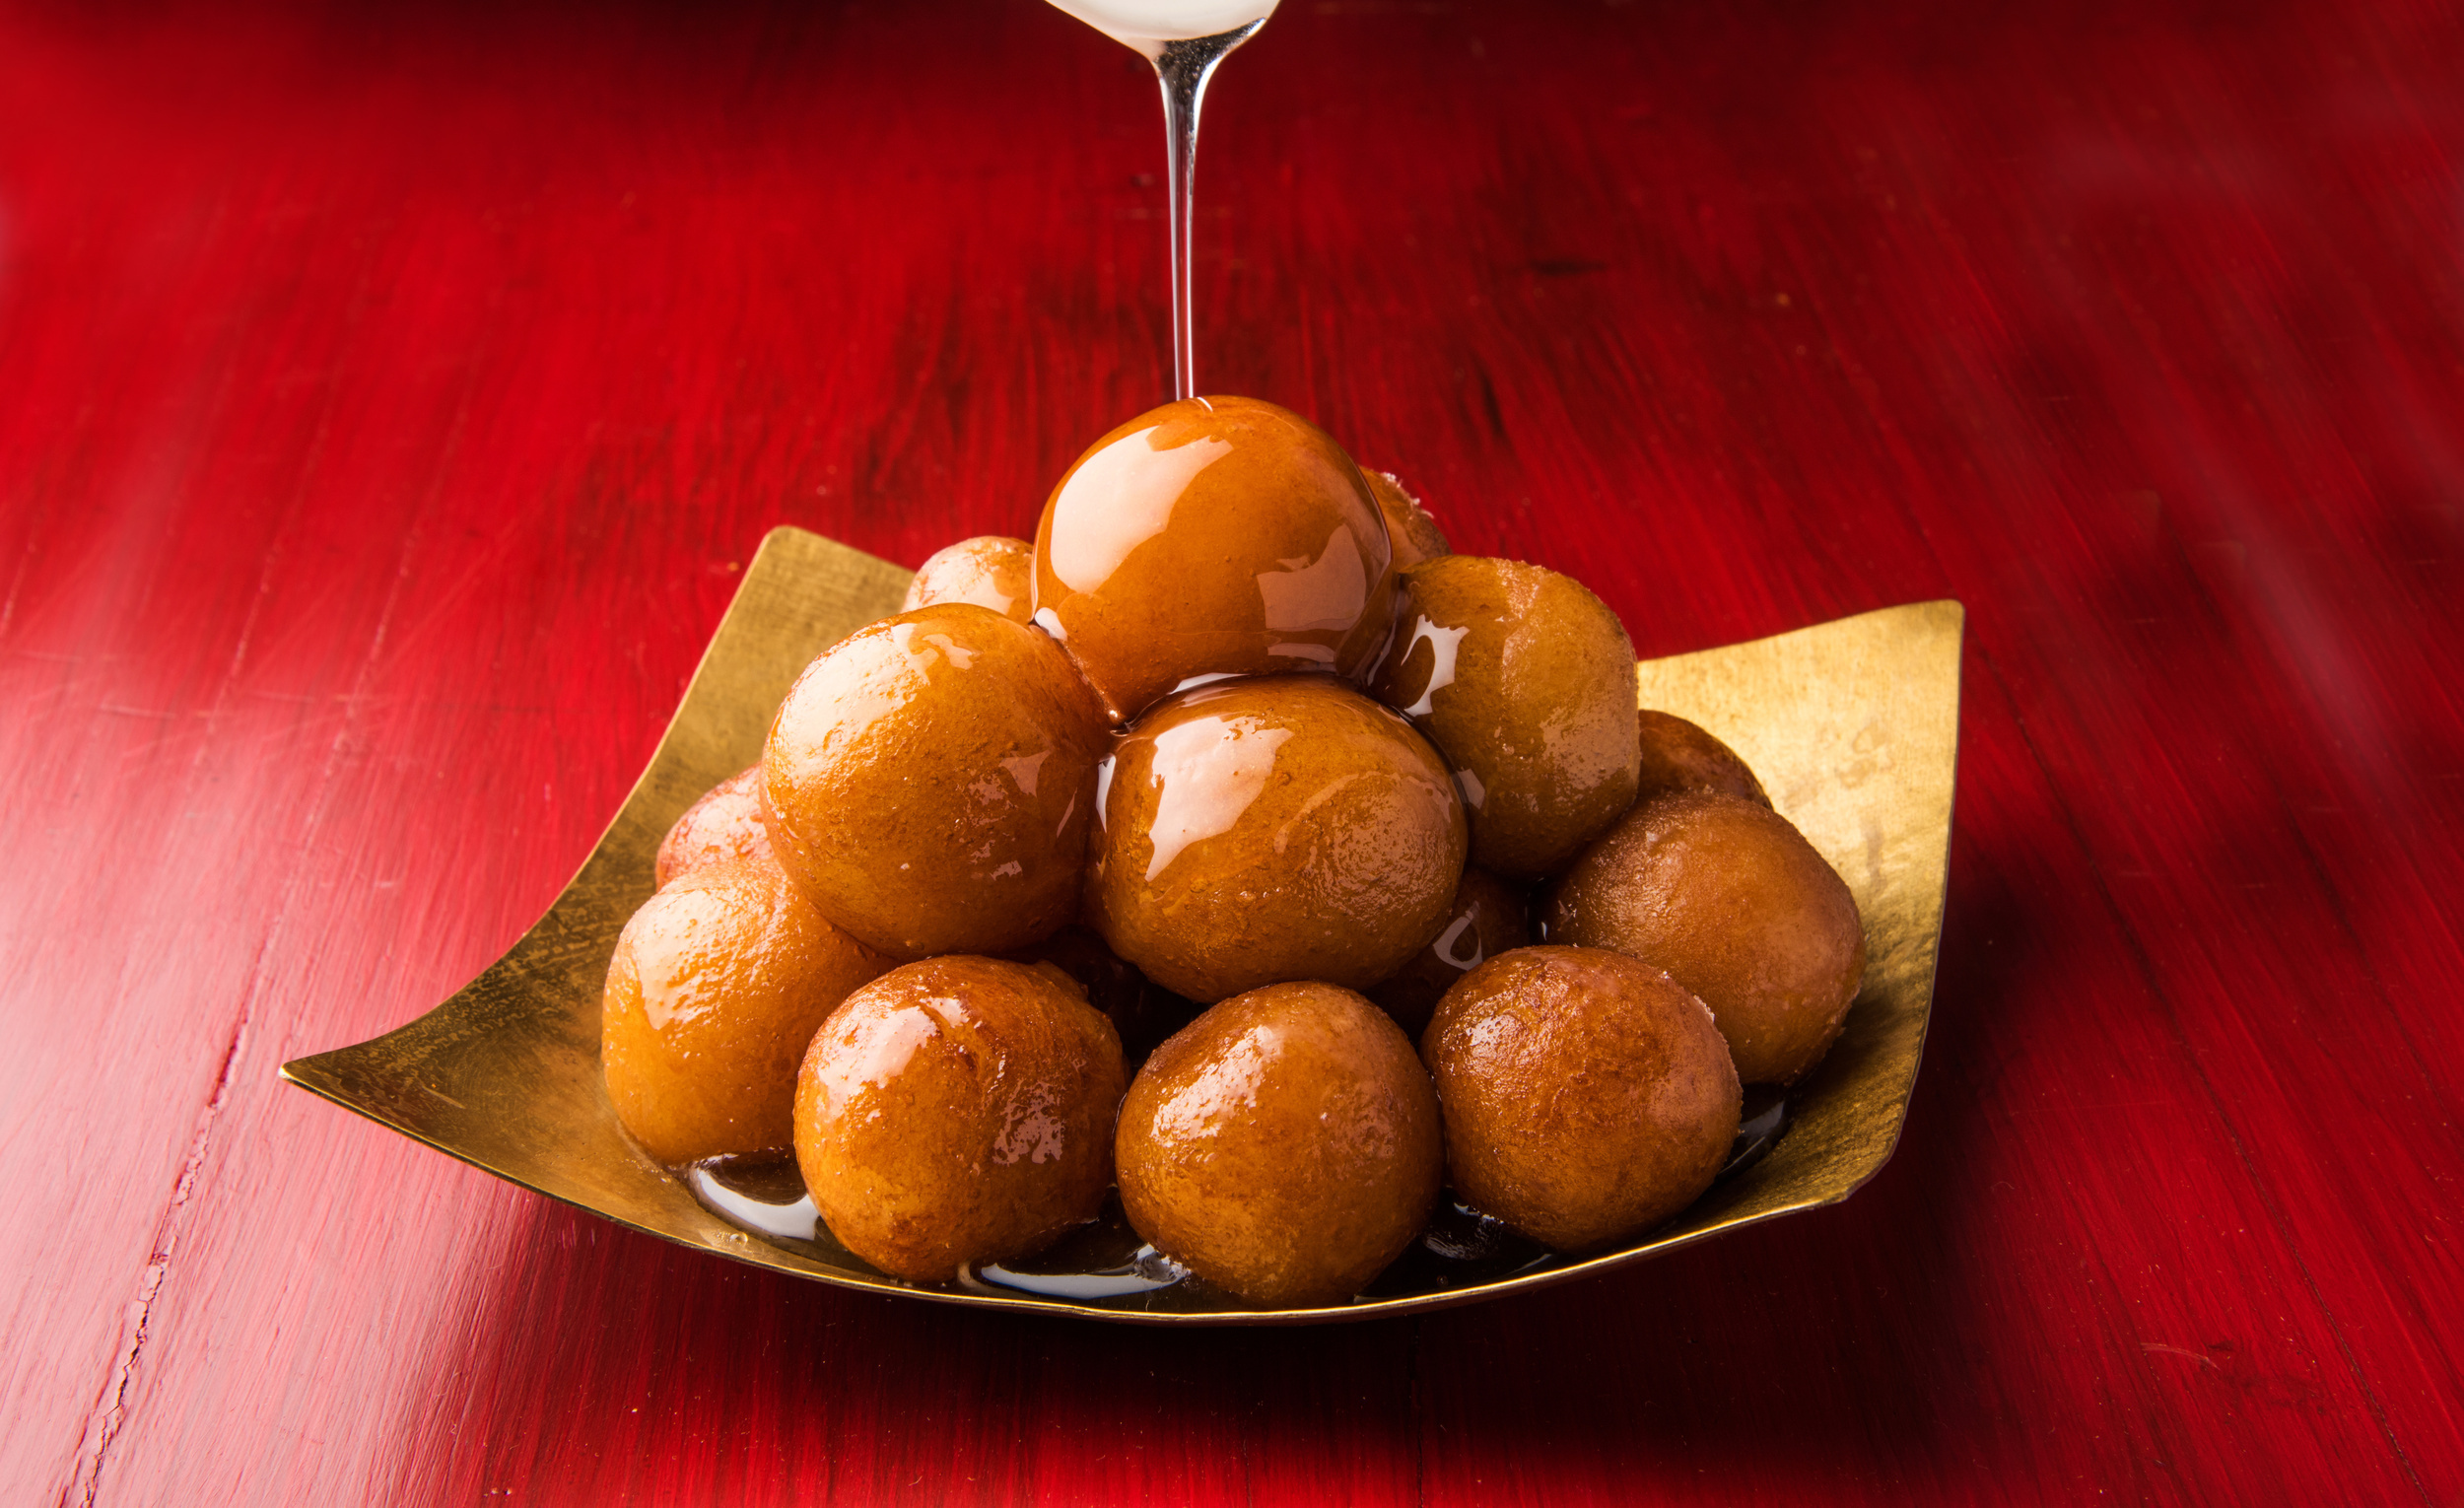 <p>A popular dessert in South Asian culture, <em>gulab jamun</em> (“rose water berry”) involves reducing milk down to a soft dough, but many chefs opt to instead use milk powder, as the reduction process can be tedious and time-consuming. After the dough balls are formed, they are fried in oil or ghee and covered in a sweet sugar syrup that makes them irresistible. <a href="https://hebbarskitchen.com/milk-powder-gulab-jamun-recipe/"><span>Get the details from Hebbars Kitchen</span></a>.</p><p><a href='https://www.msn.com/en-us/community/channel/vid-cj9pqbr0vn9in2b6ddcd8sfgpfq6x6utp44fssrv6mc2gtybw0us'>Follow us on MSN to see more of our exclusive lifestyle content.</a></p>